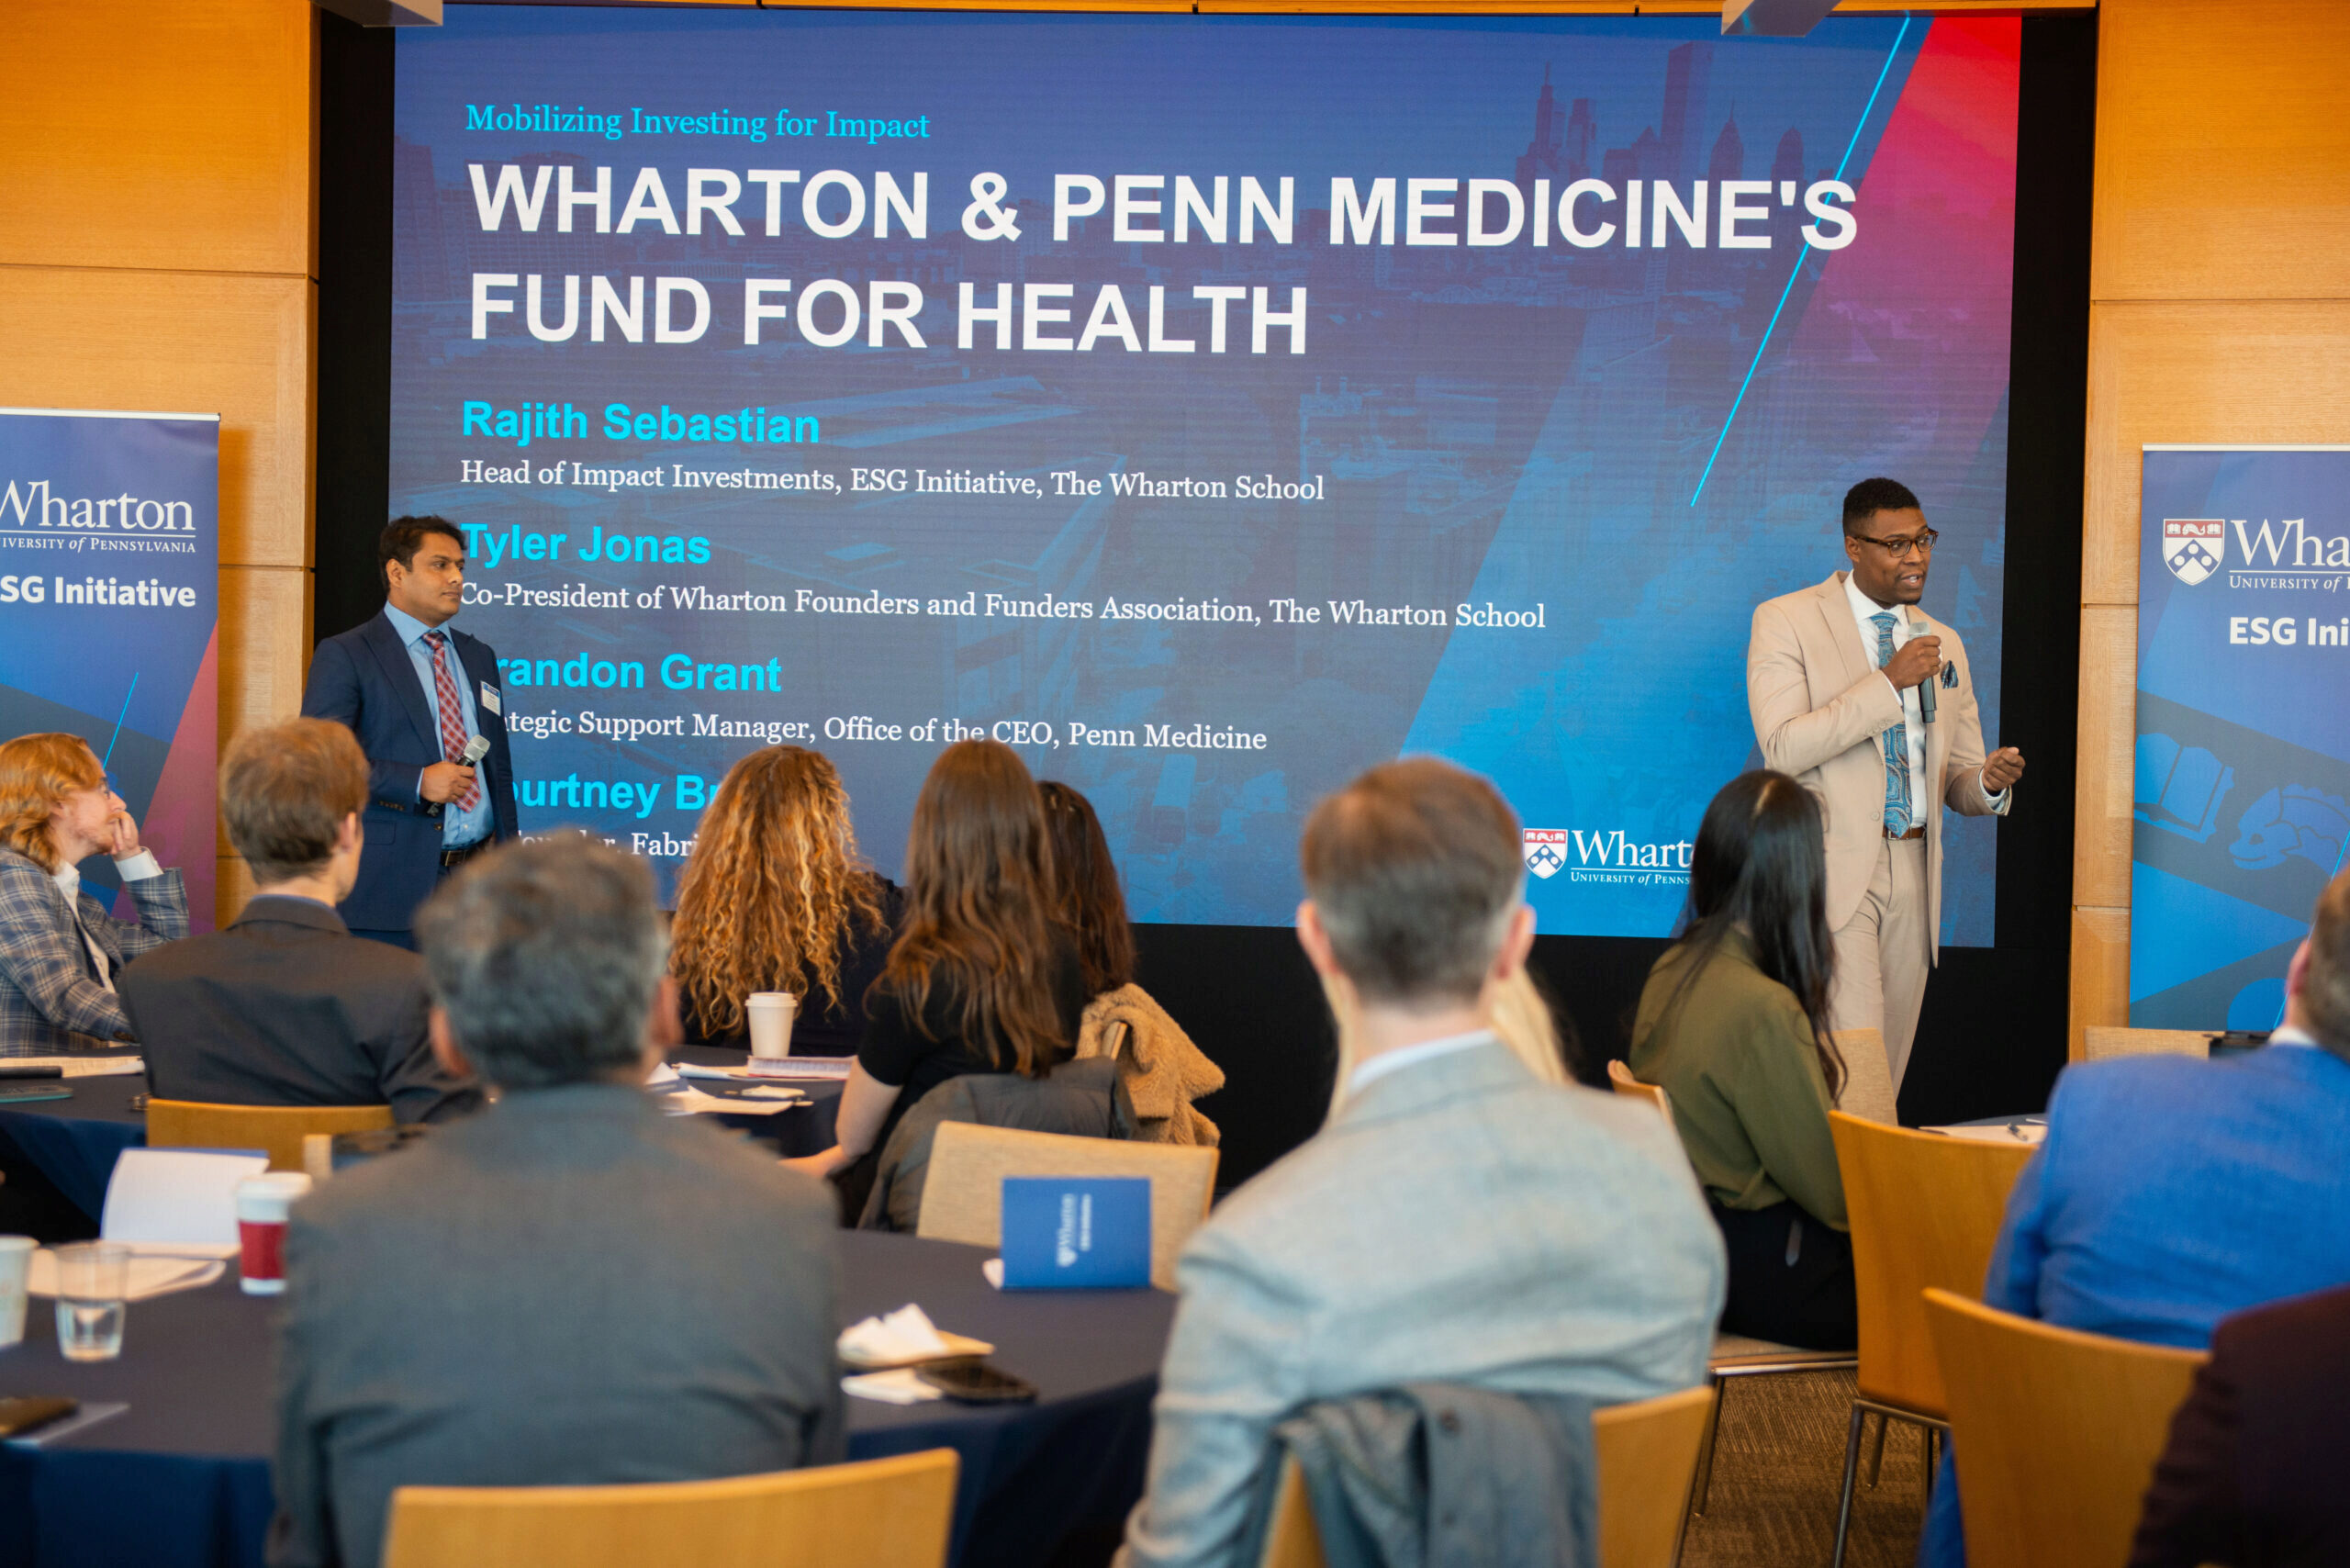 Brandon Grant and Rajith Sebastian in suits presenting to a room full of people in business attire in front of a slide that says "Wharton & Penn Medicine's Fund for Health"